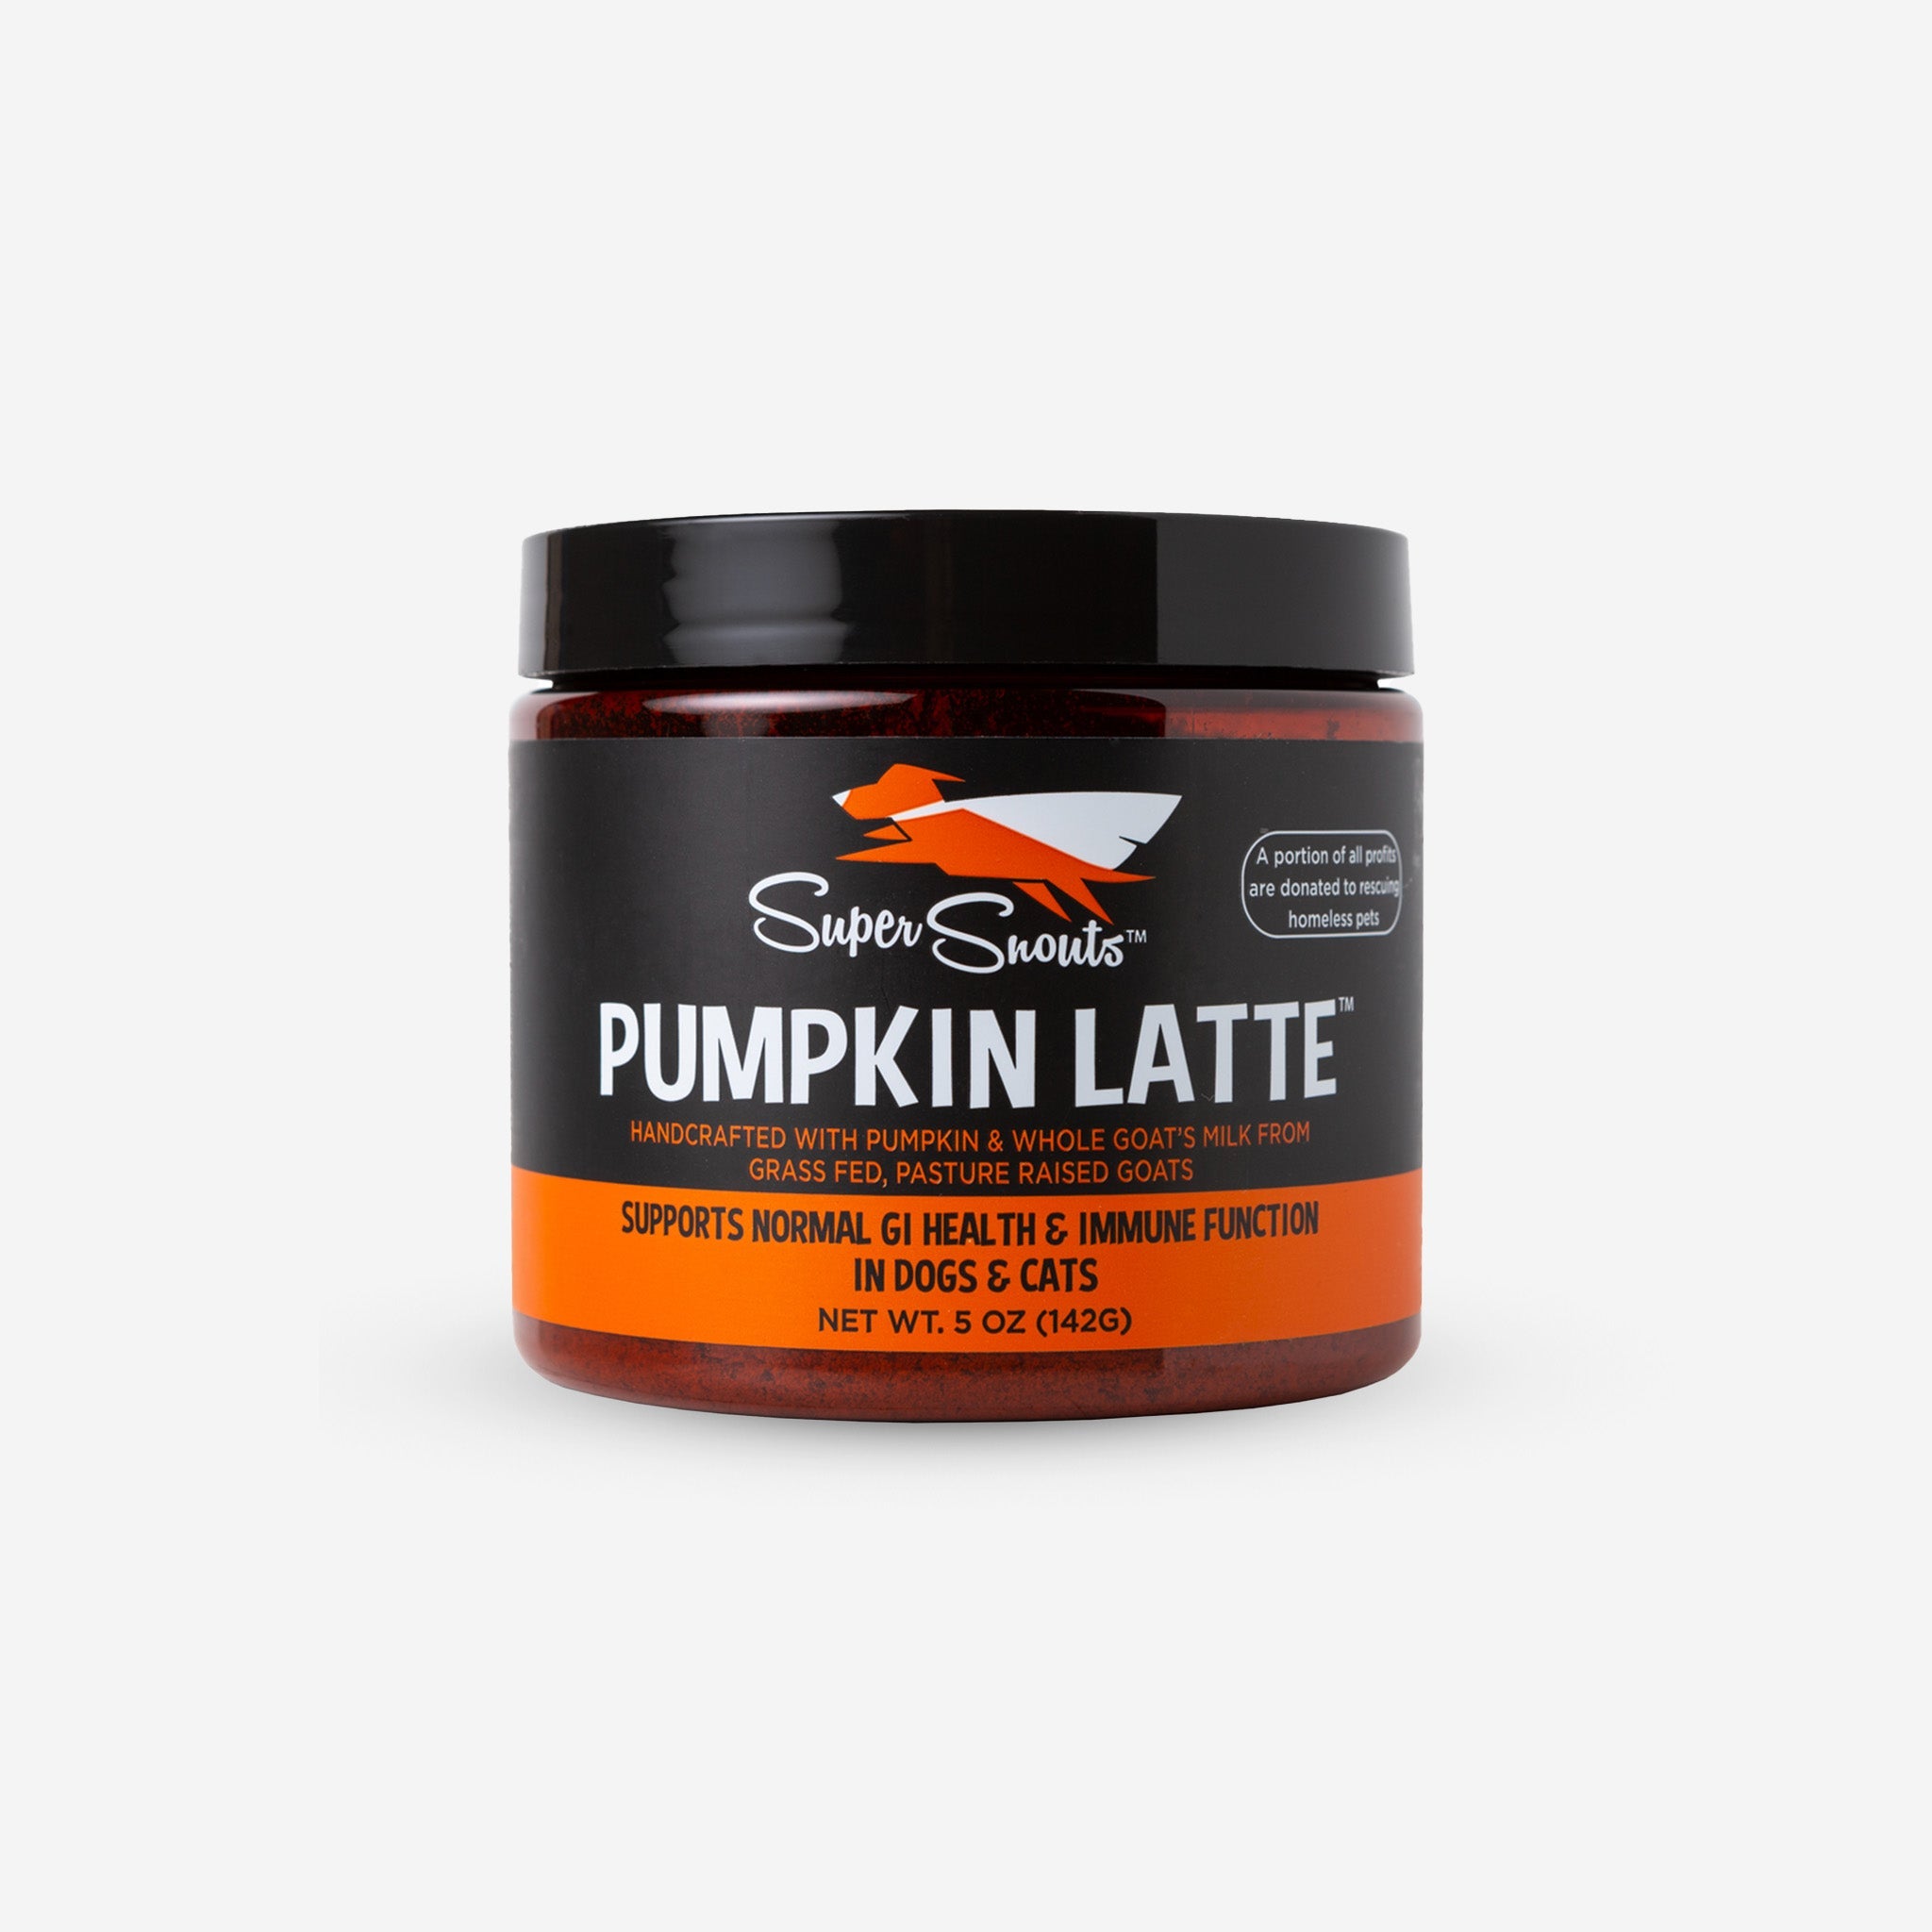 Super Snouts Pumpkin Latte for GI Health & Immune Function in Dogs & Cats